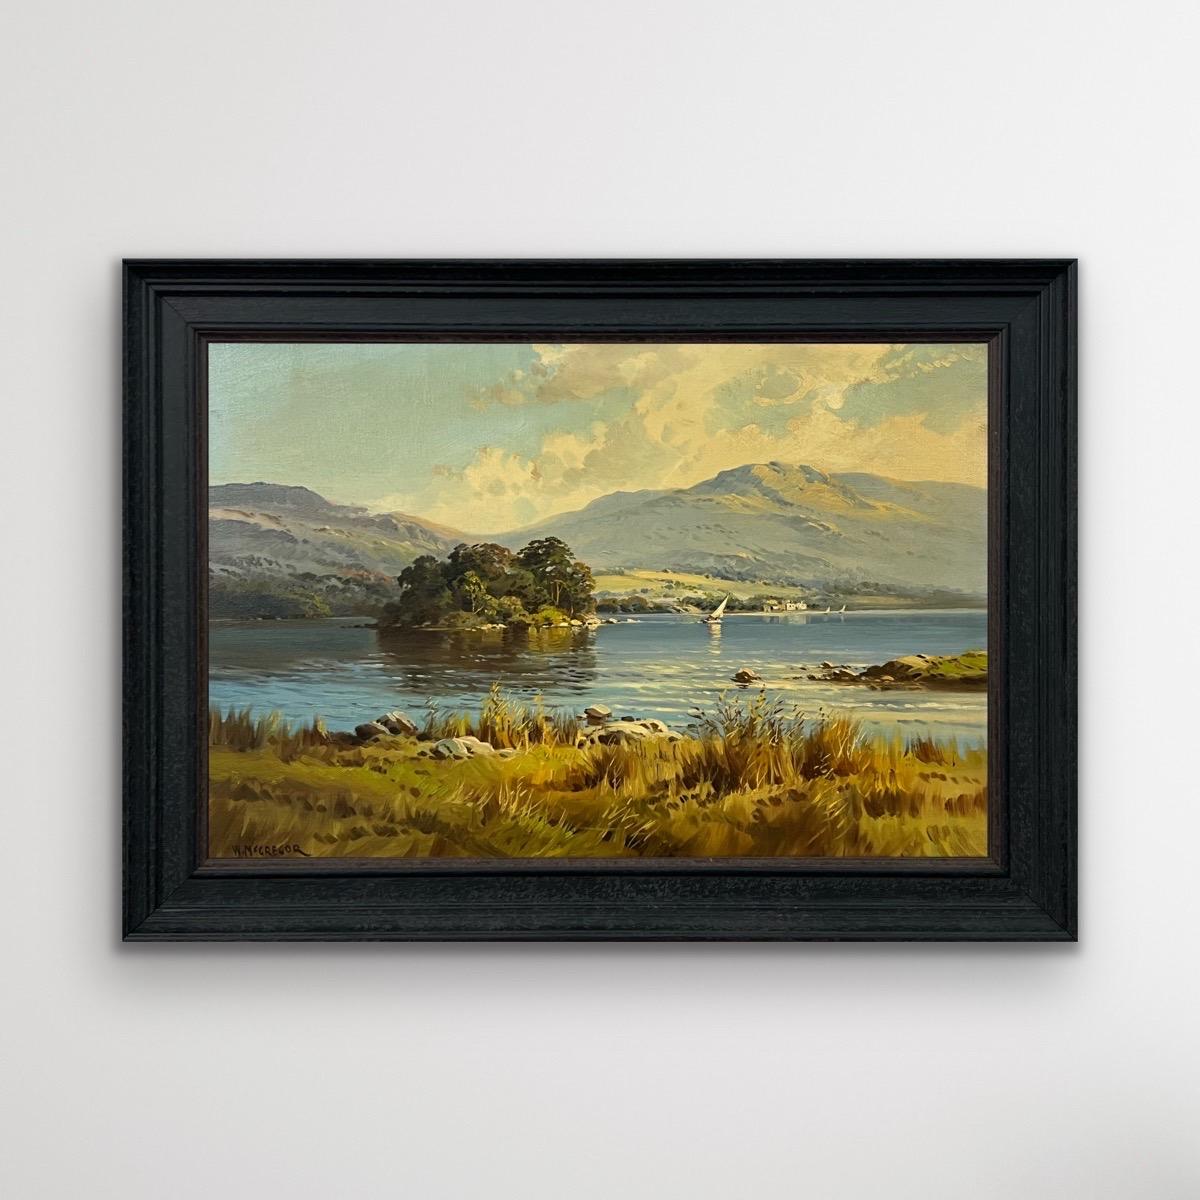 Loch Lomond in the Mountains of the Scottish Highlands - a beautiful realist oil painting of the Scottish Highlands from a highly respected British Landscape Artist. 

Art measures 30 x 20 inches
Frame measures 35 x 25 inches

Reframed in the